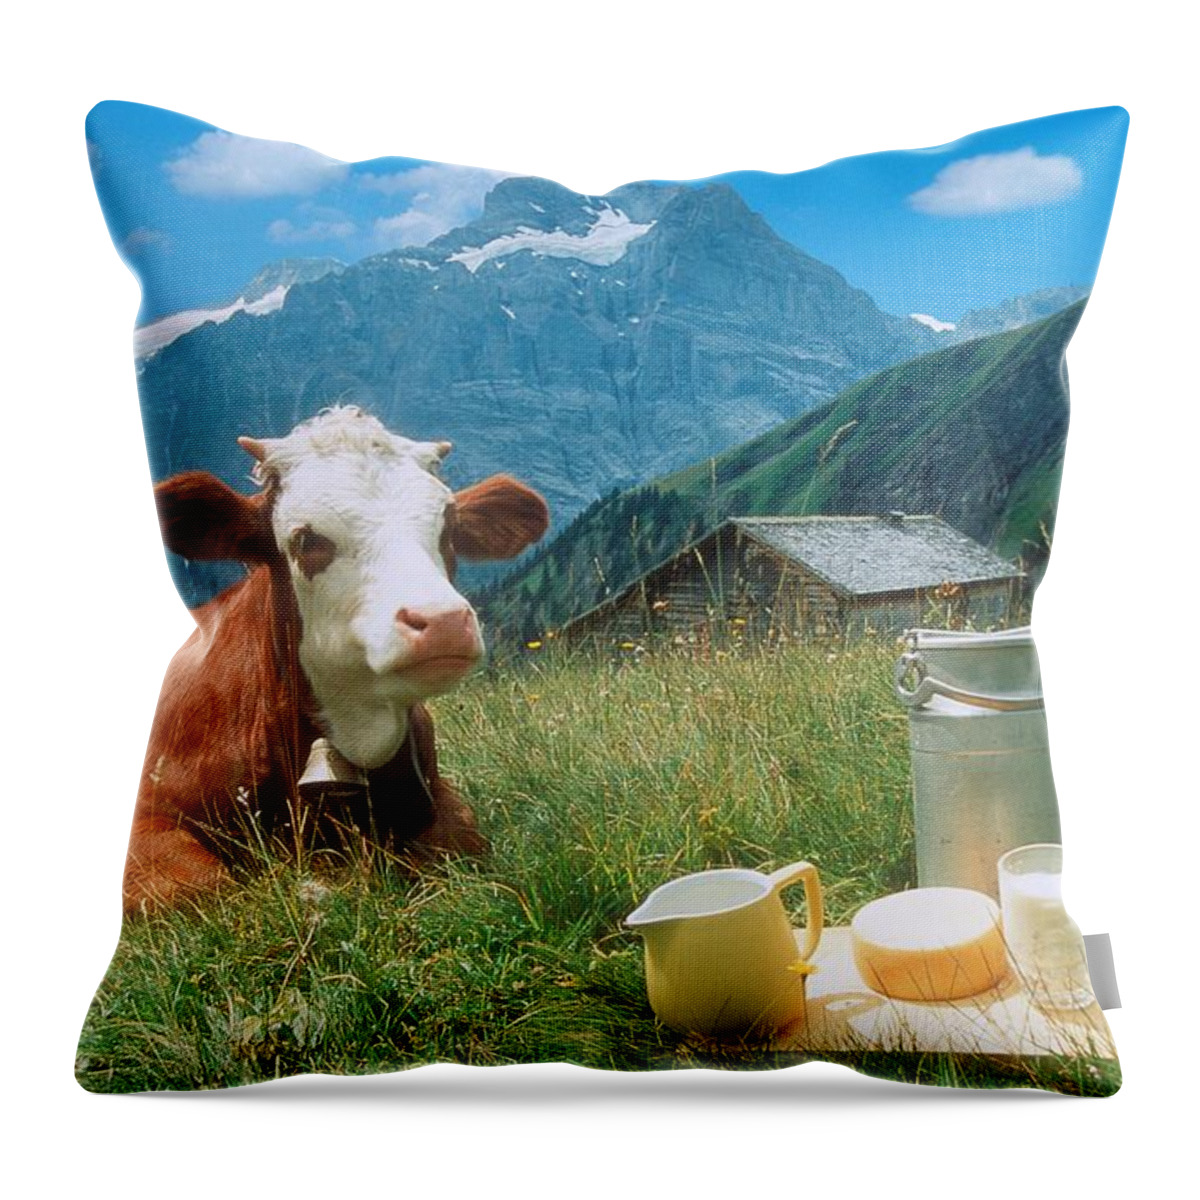 Estock Throw Pillow featuring the digital art Cow With Dairy Products by Cornelia Dorr